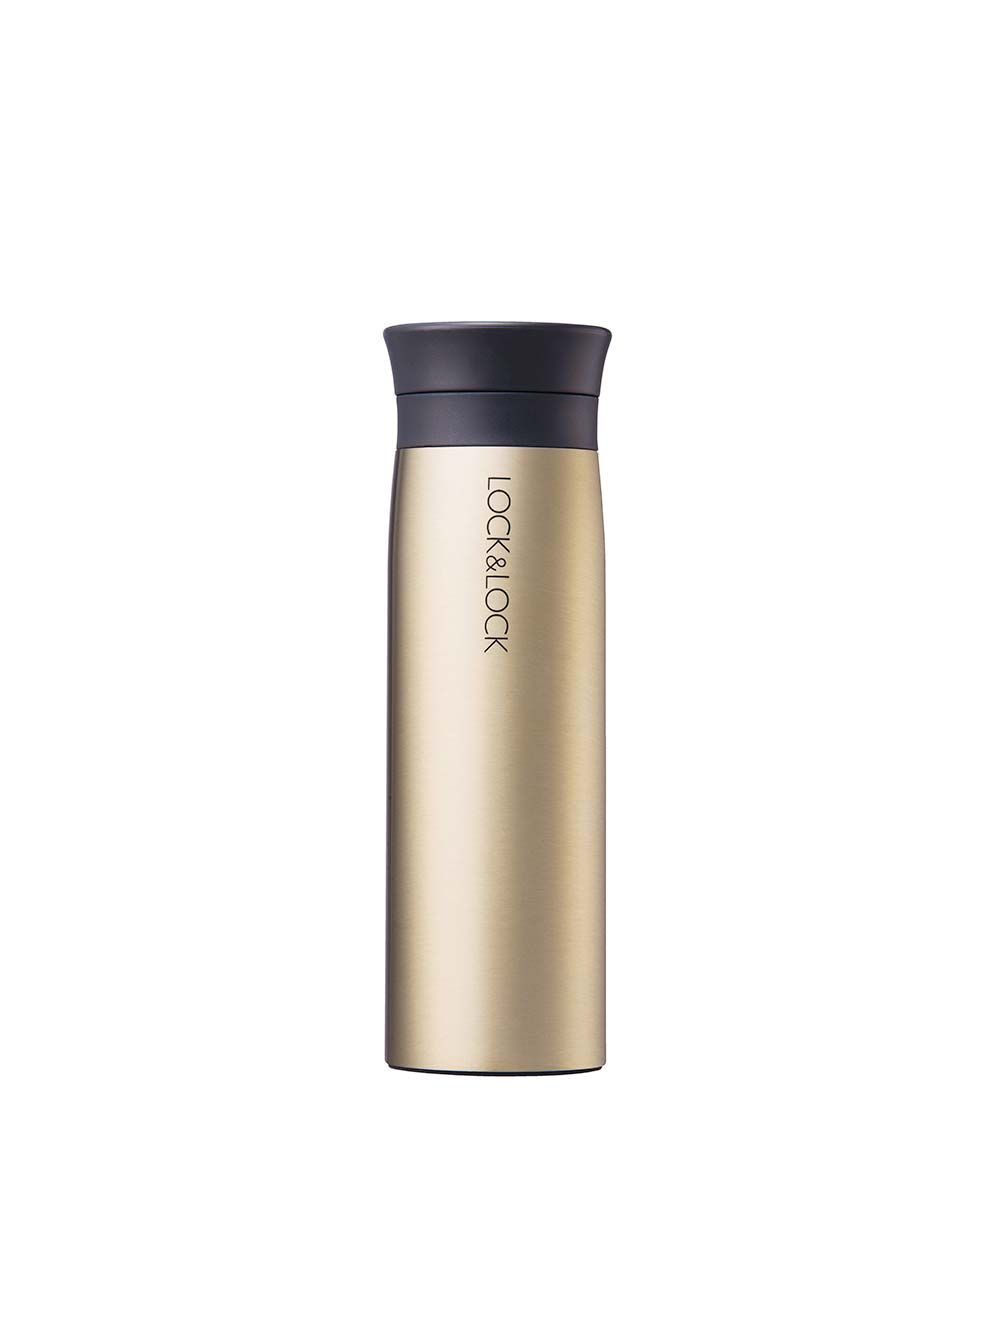 Lock & Lock Hot and Cool Line Tumbler 400ml Gold-HLHC4119G